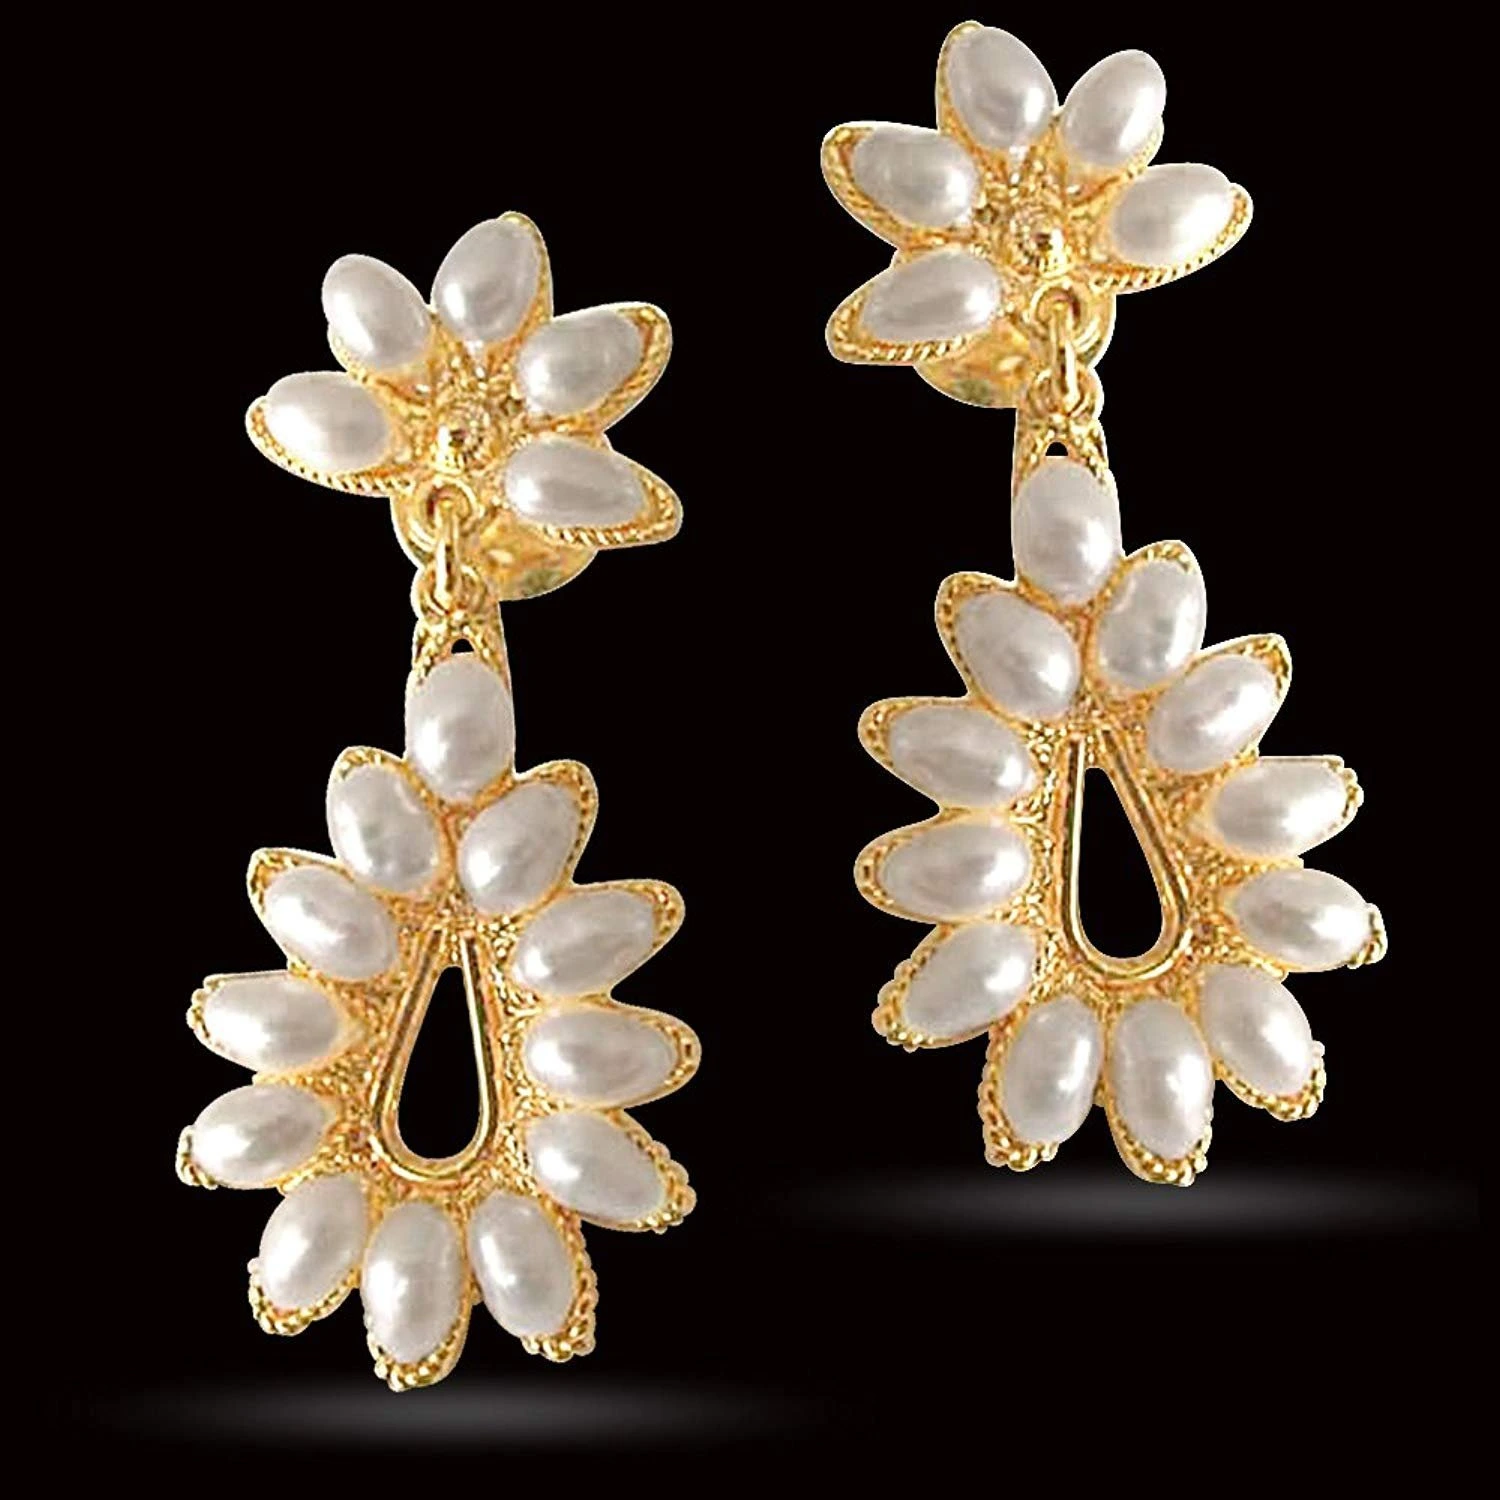 Flower Bloom - Flower Shaped Real Rice Pearl & Gold Plated Hanging Earrings for Women (SE22)